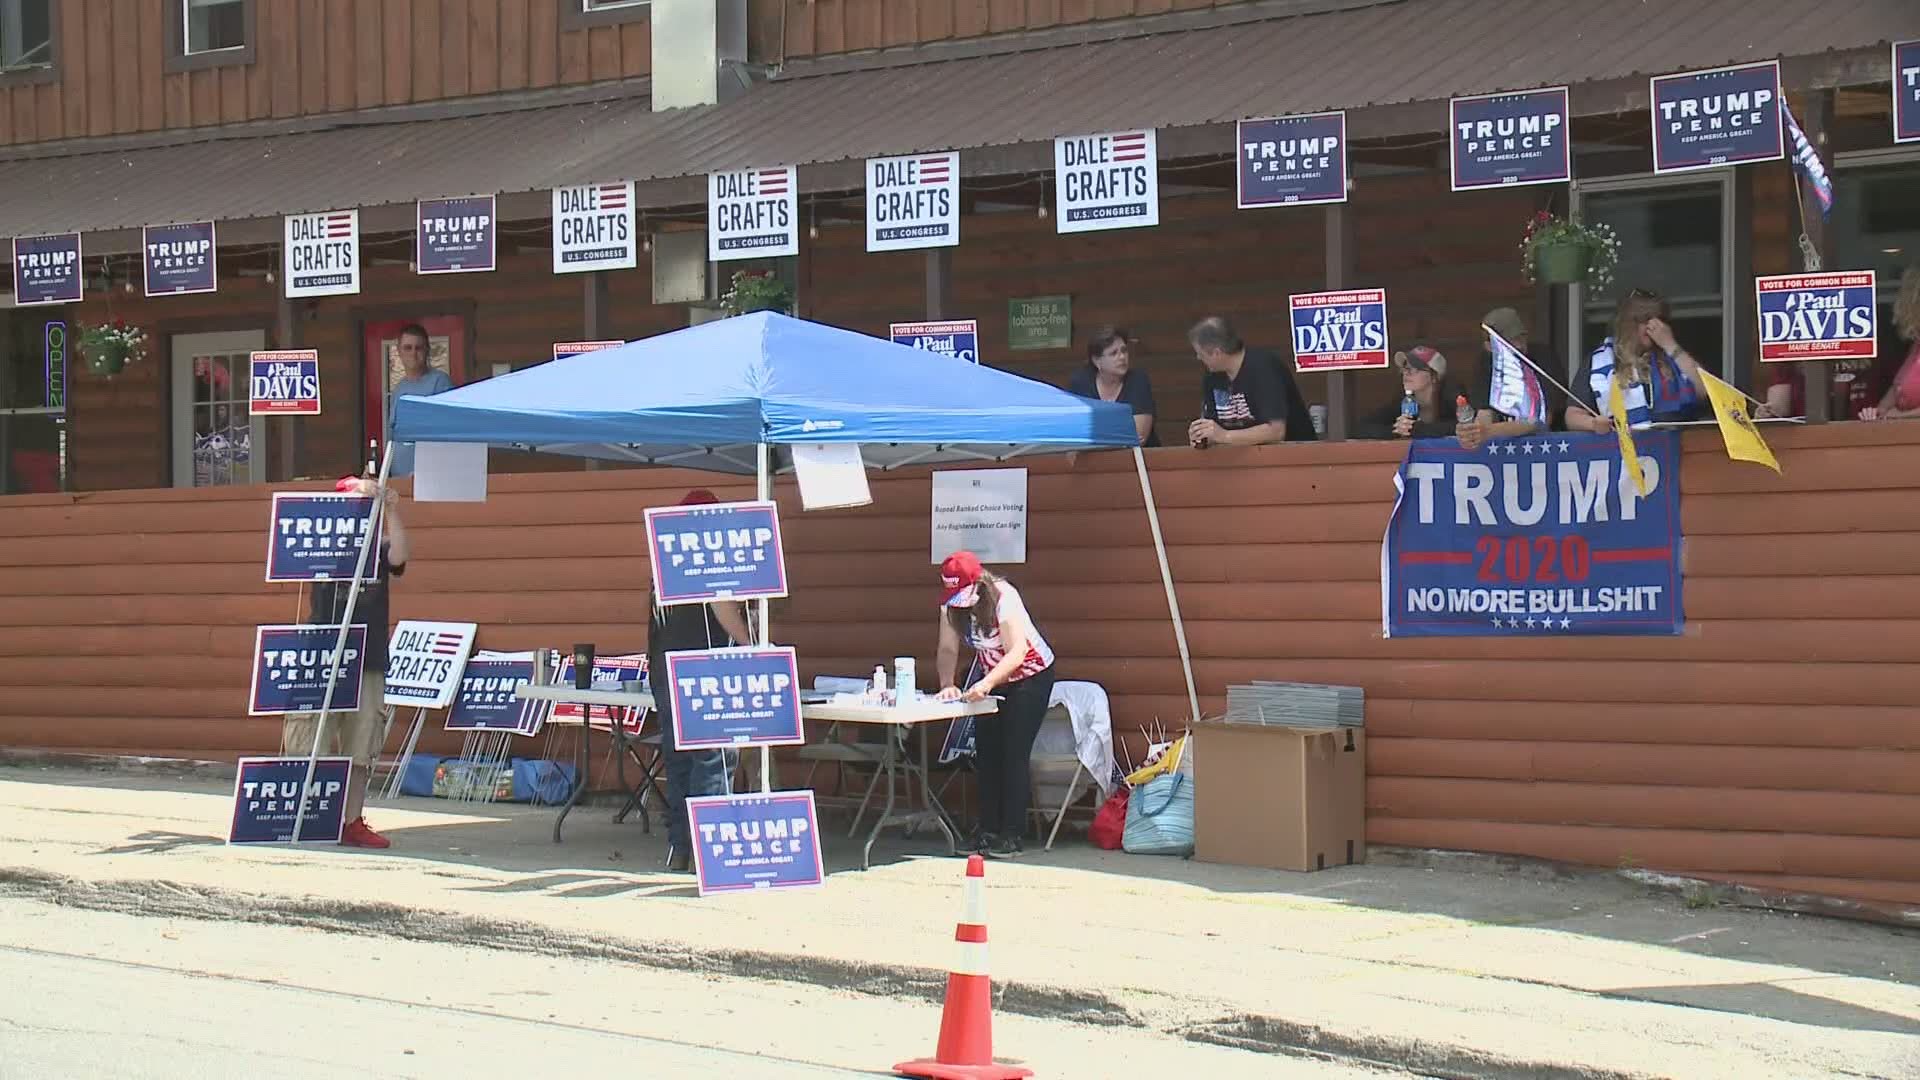 Downtown Guilford was full of supporters and protestors for President Trump's visit